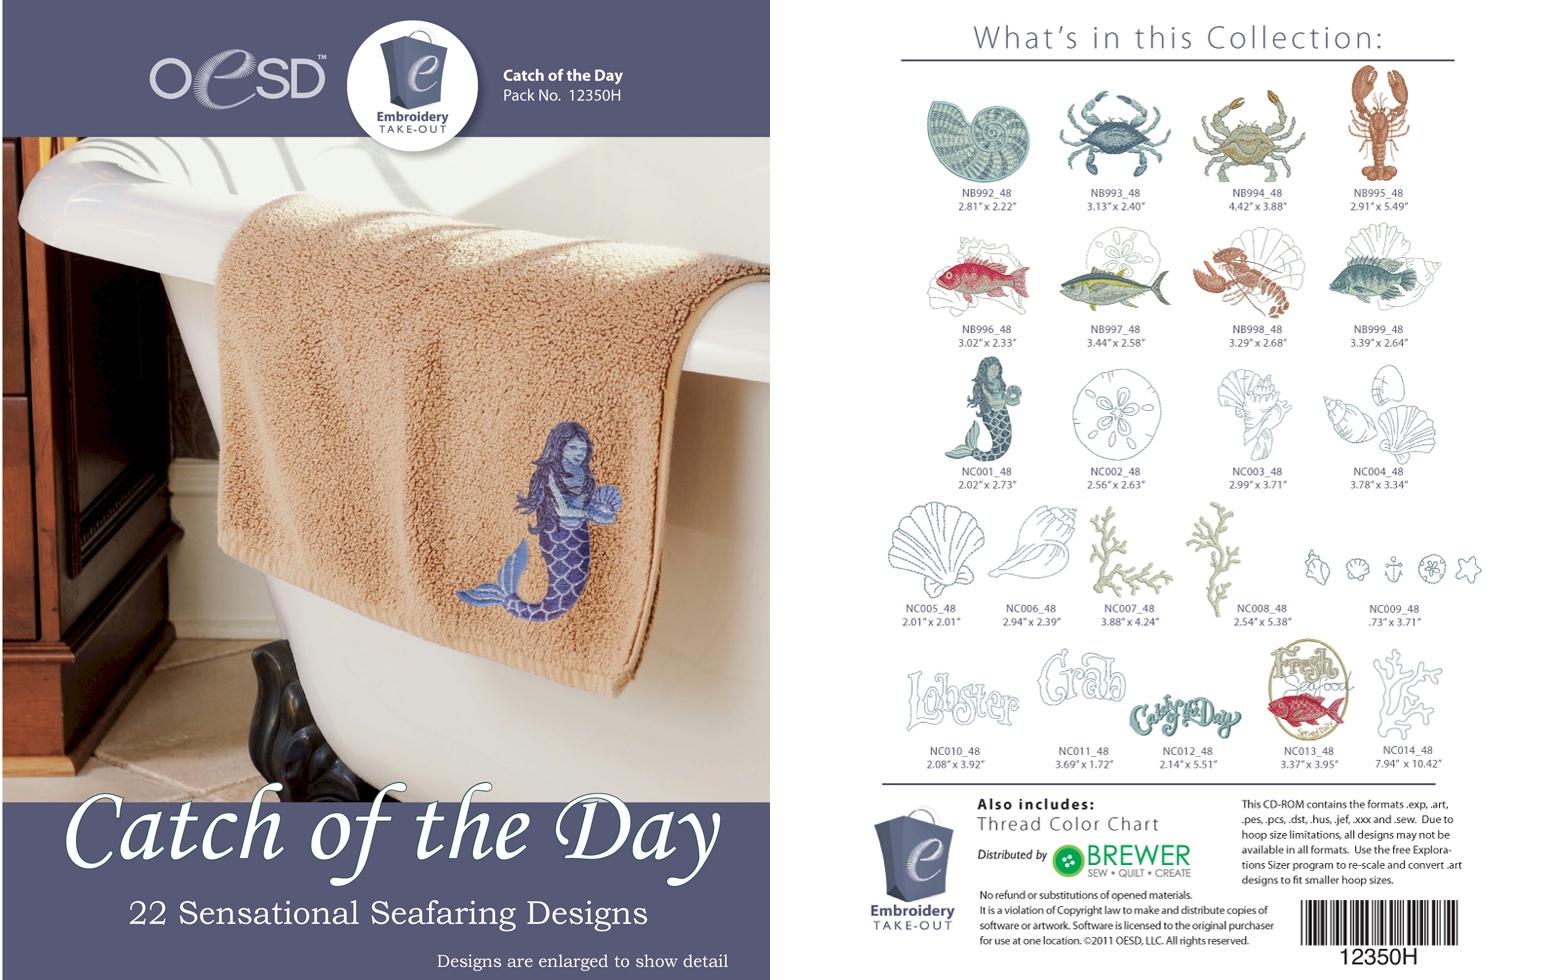 Catch of the Day Embroidery Designs By Oklahoma Embroidery on Multi-Format CD-ROM